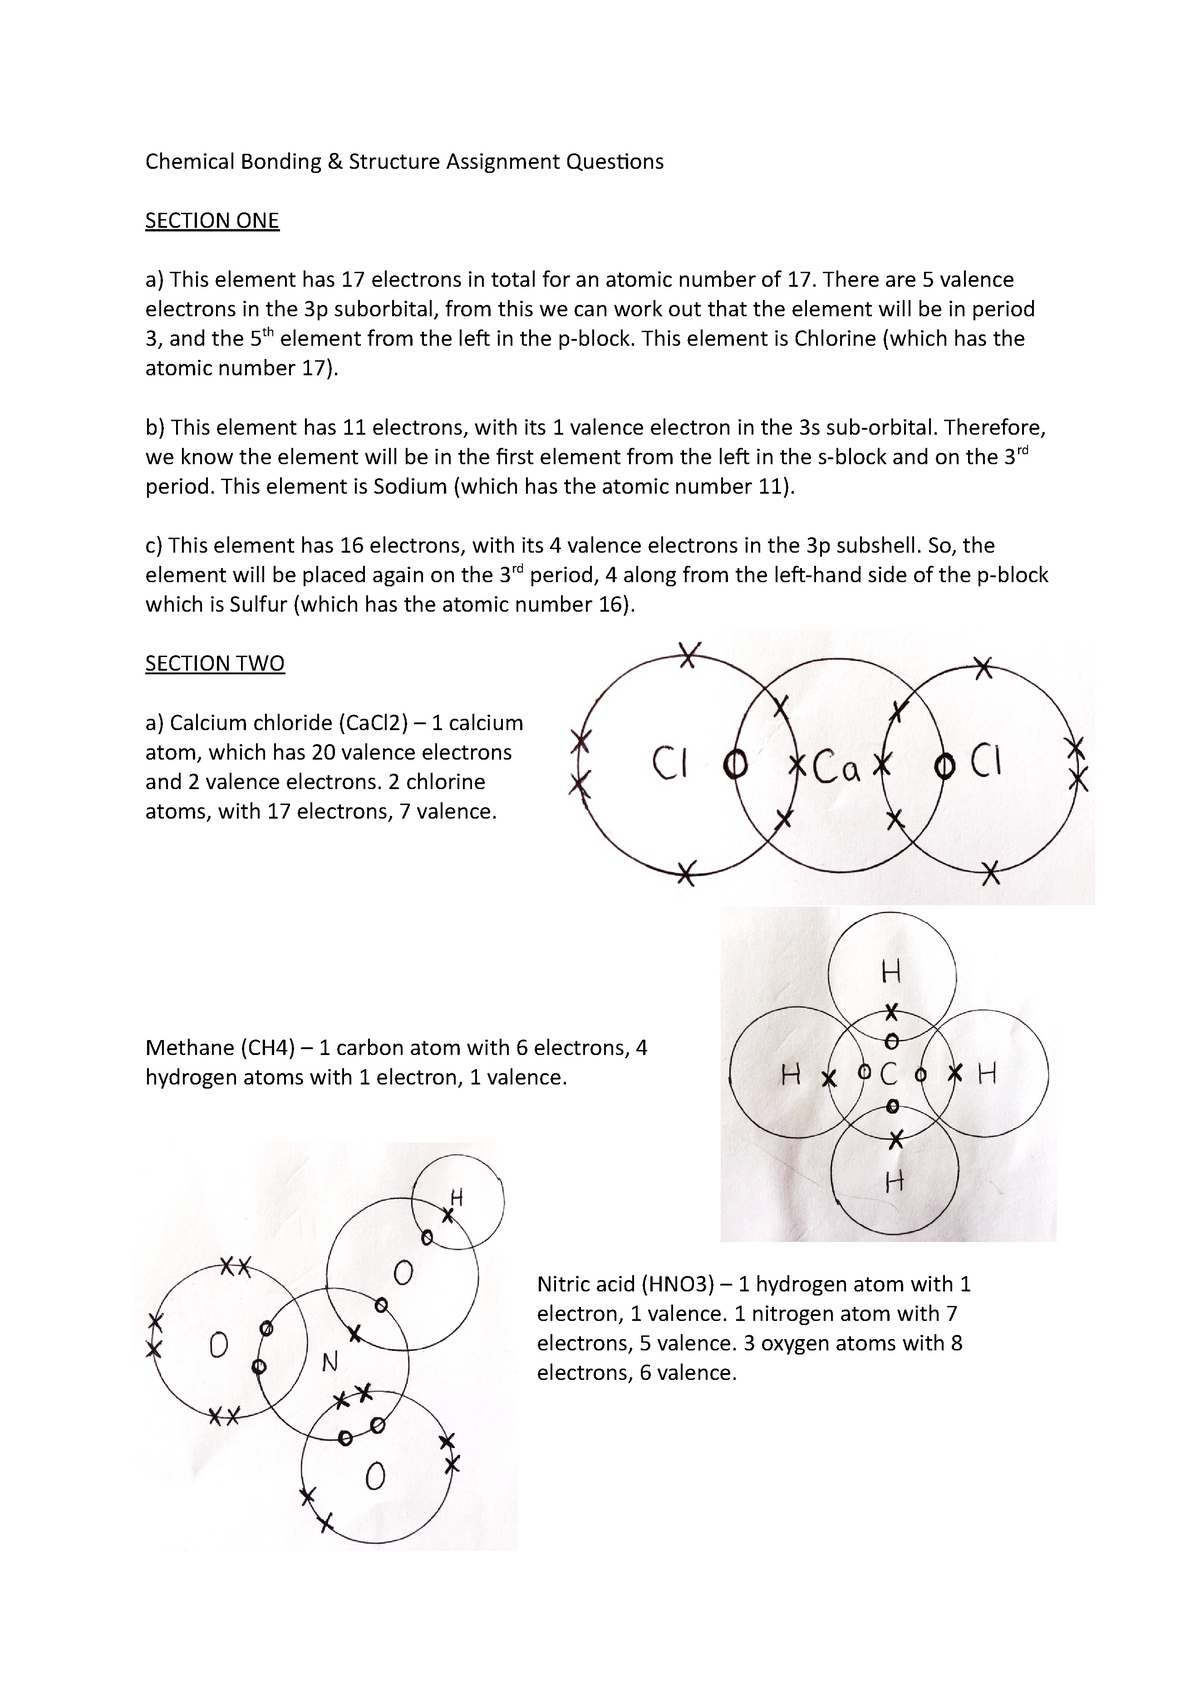 Unit 22 worksheet chemical bonding and structure - StuDocu Within Chemical Bonding Worksheet Key